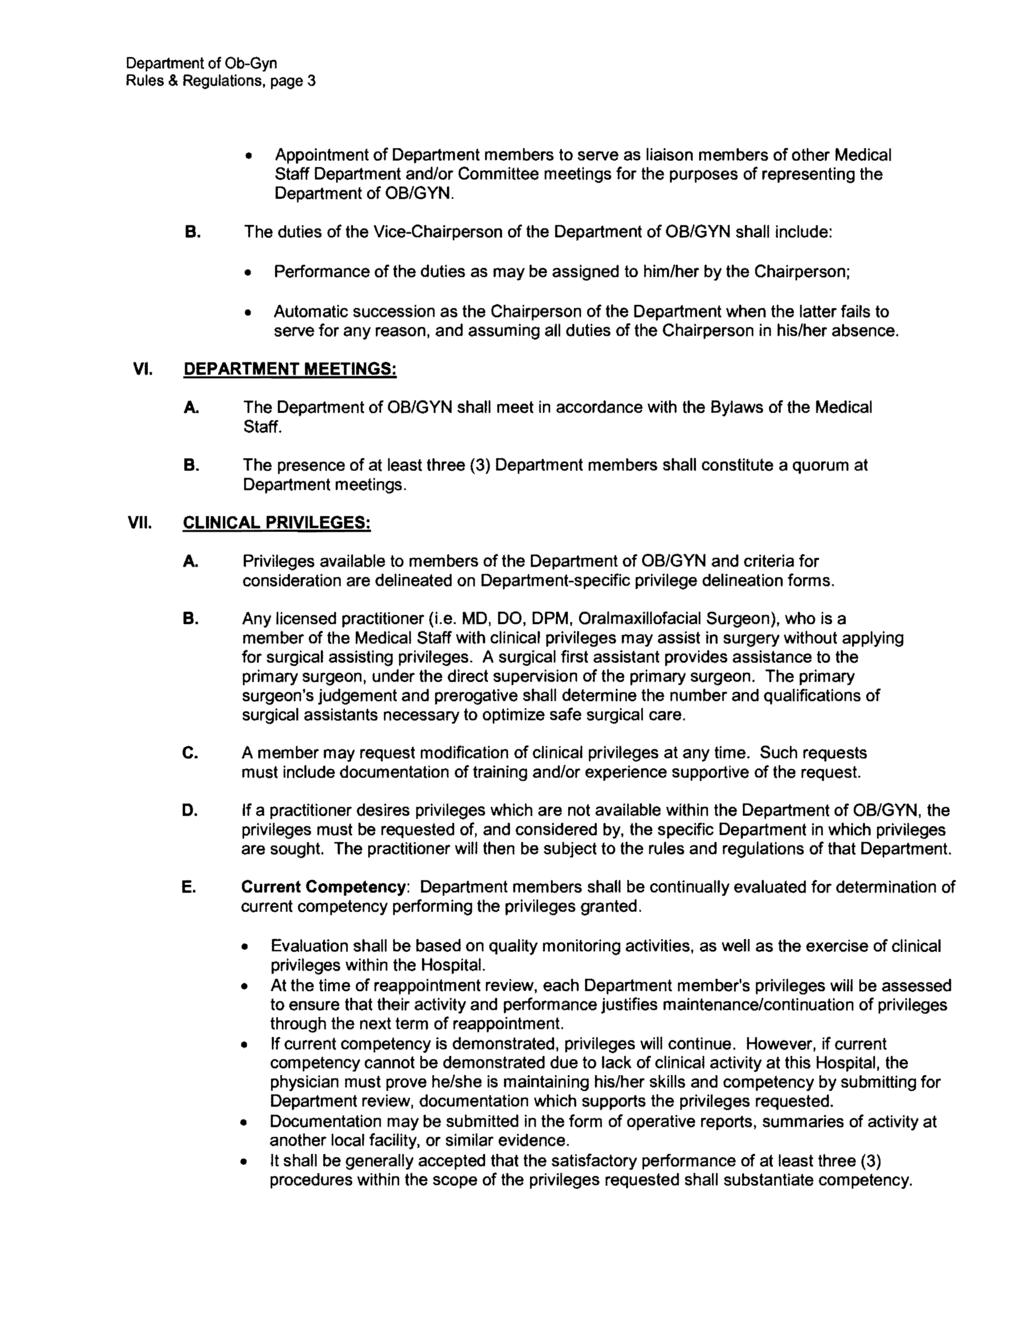 Rules & Regulations, page 3 Appointment of Department members to serve as liaison members of other Medical Staff Department and/or Committee meetings for the purposes of representing the Department